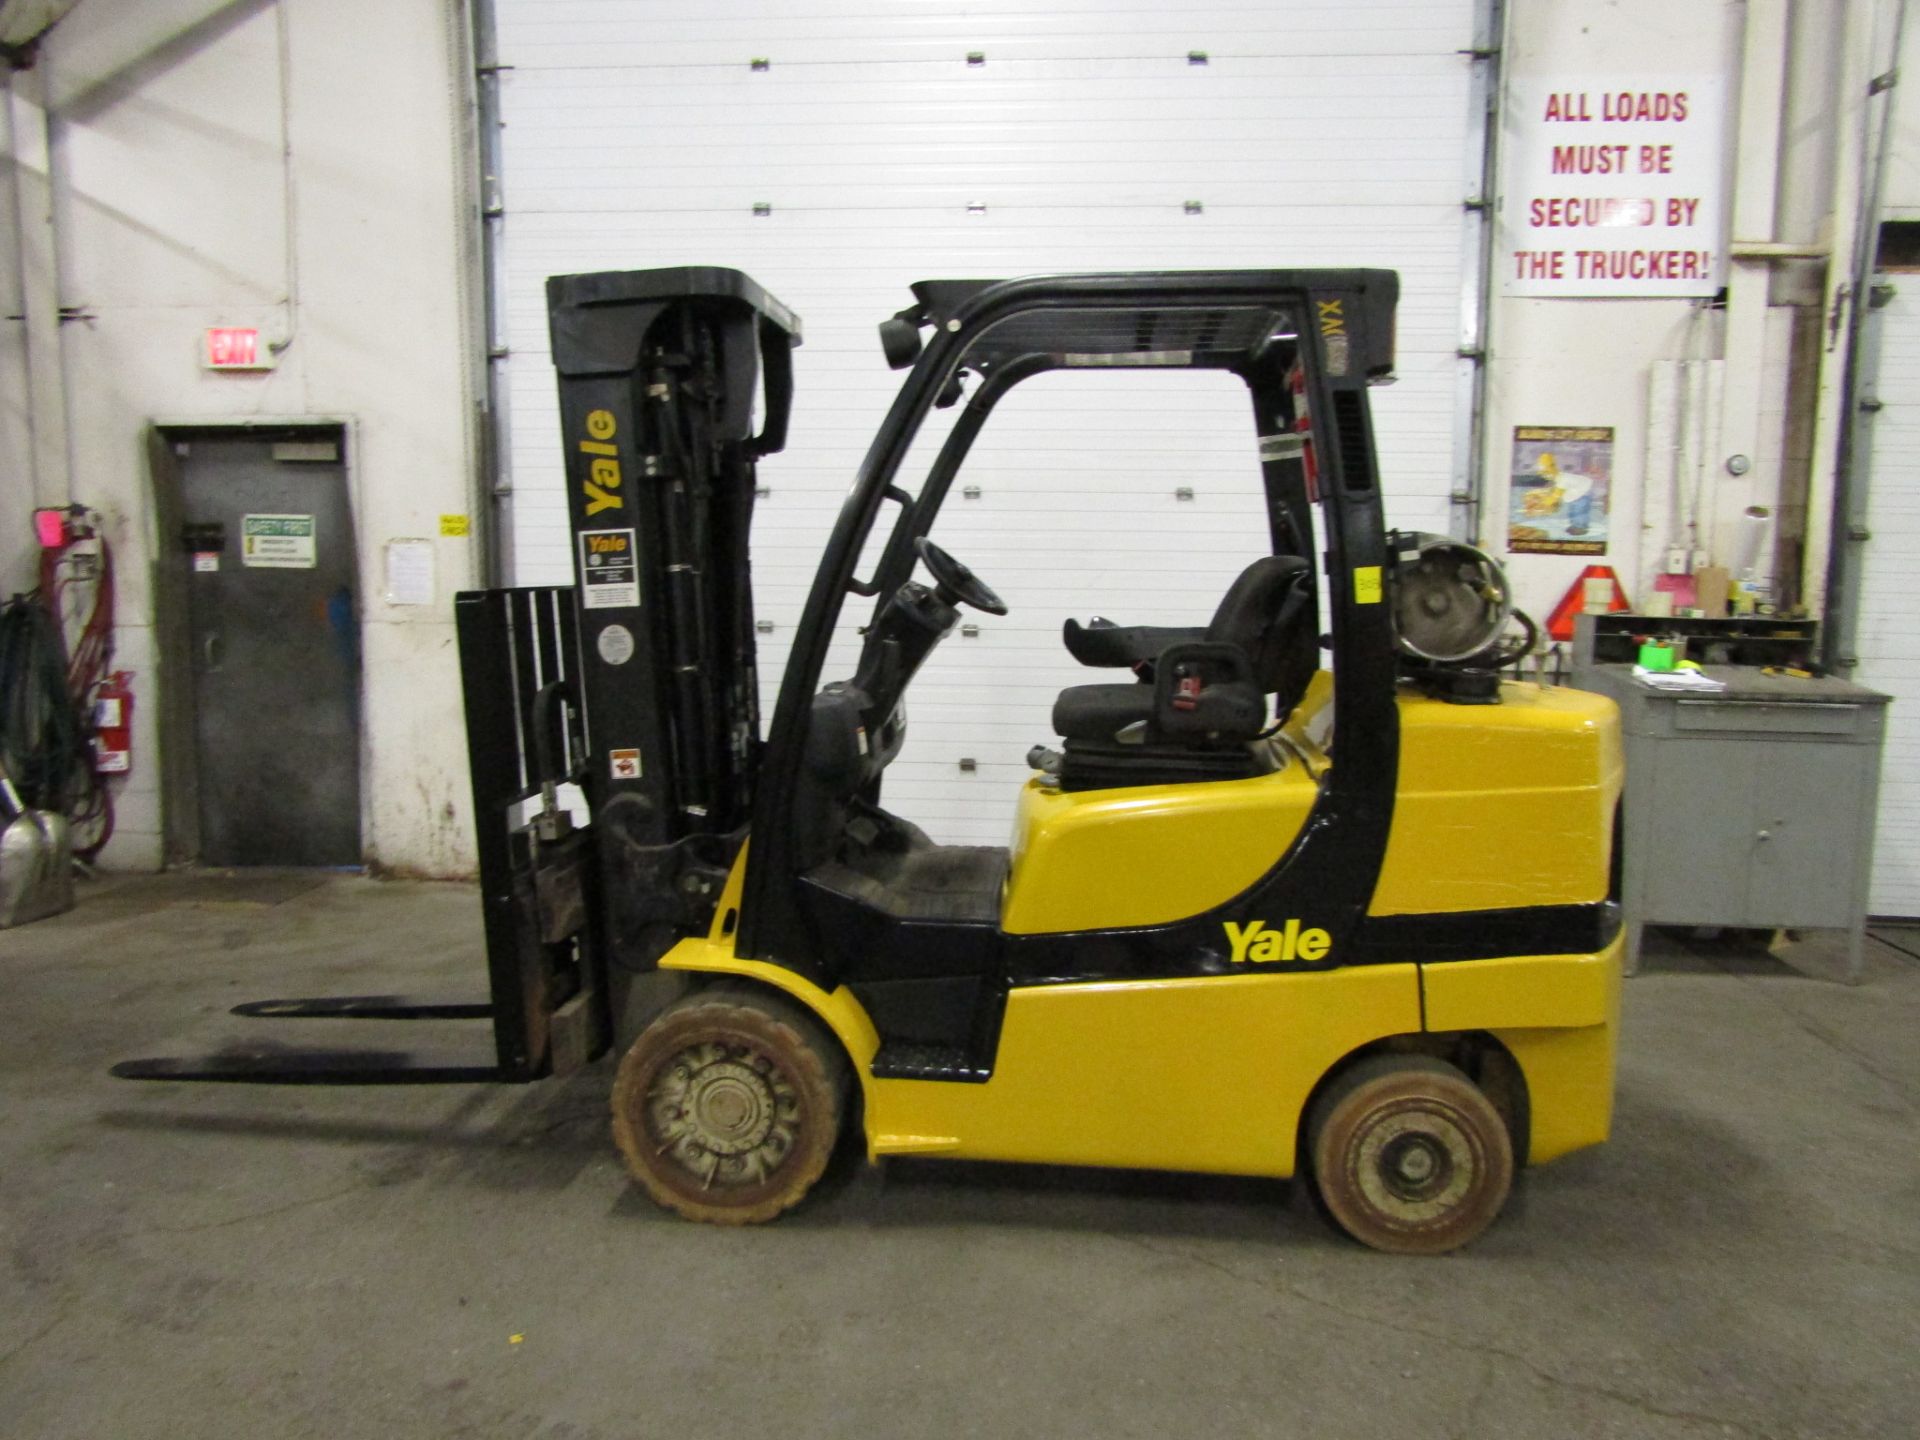 2014 Yale 8000lbs Capacity Forklift with 3-stage mast - LPG (propane) with sideshift & fork